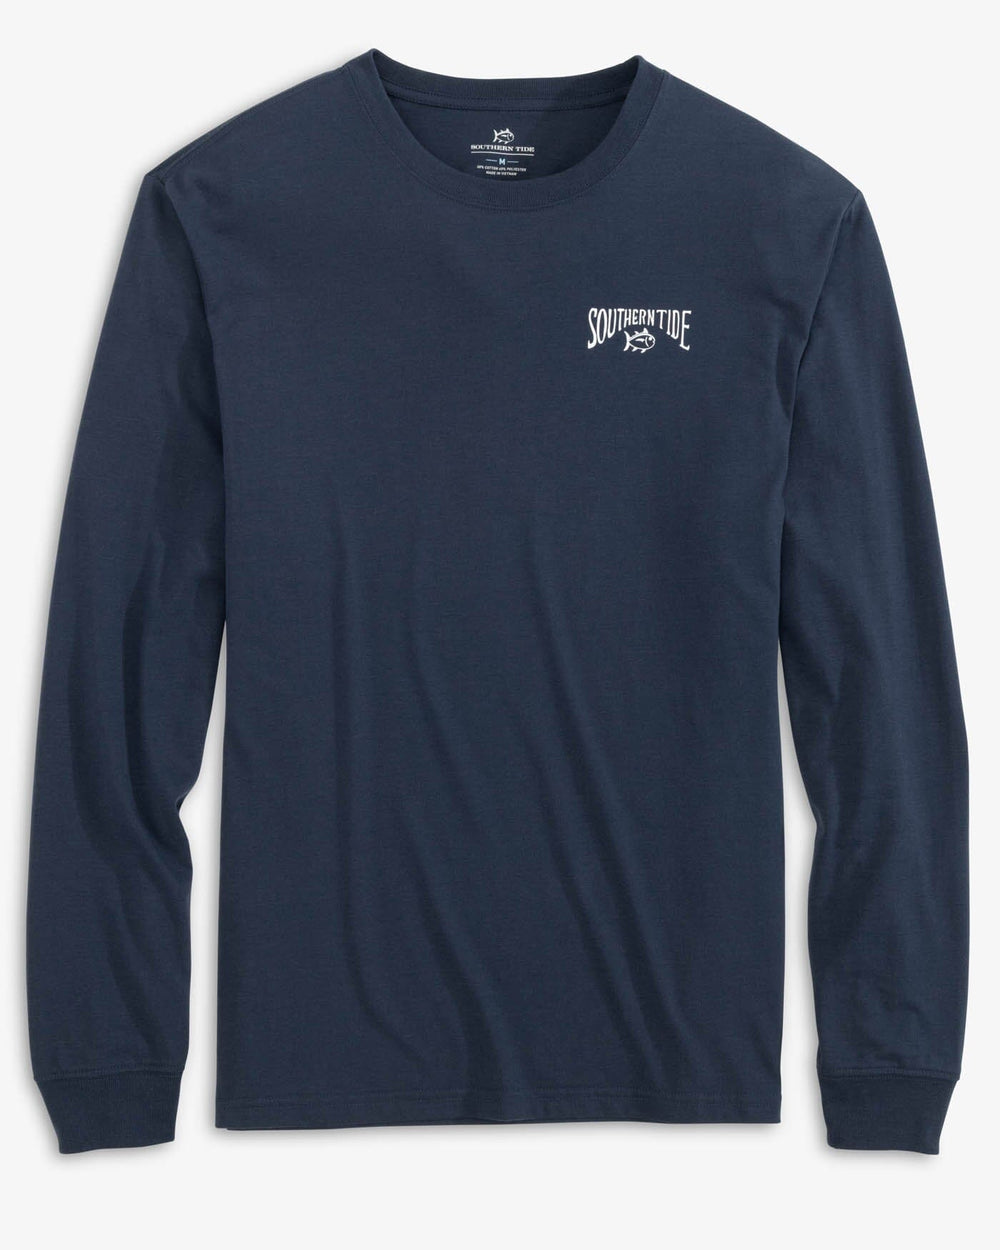 The front view of the Southern Tide Chillin at the Cabin Long Sleeve T-shirt by Southern Tide - True Navy